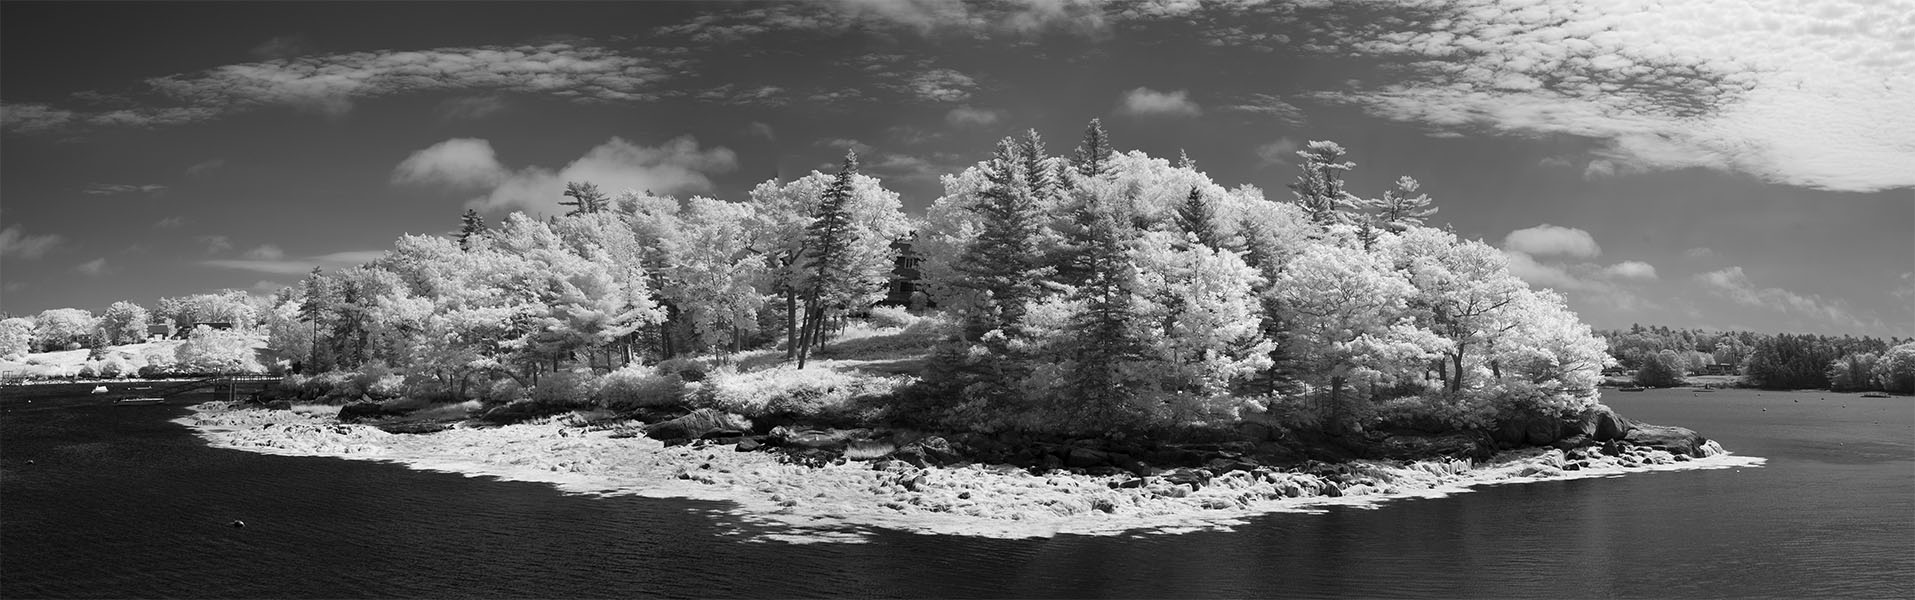 Summer Infrared Photo of Island near Boothbay, Maine.